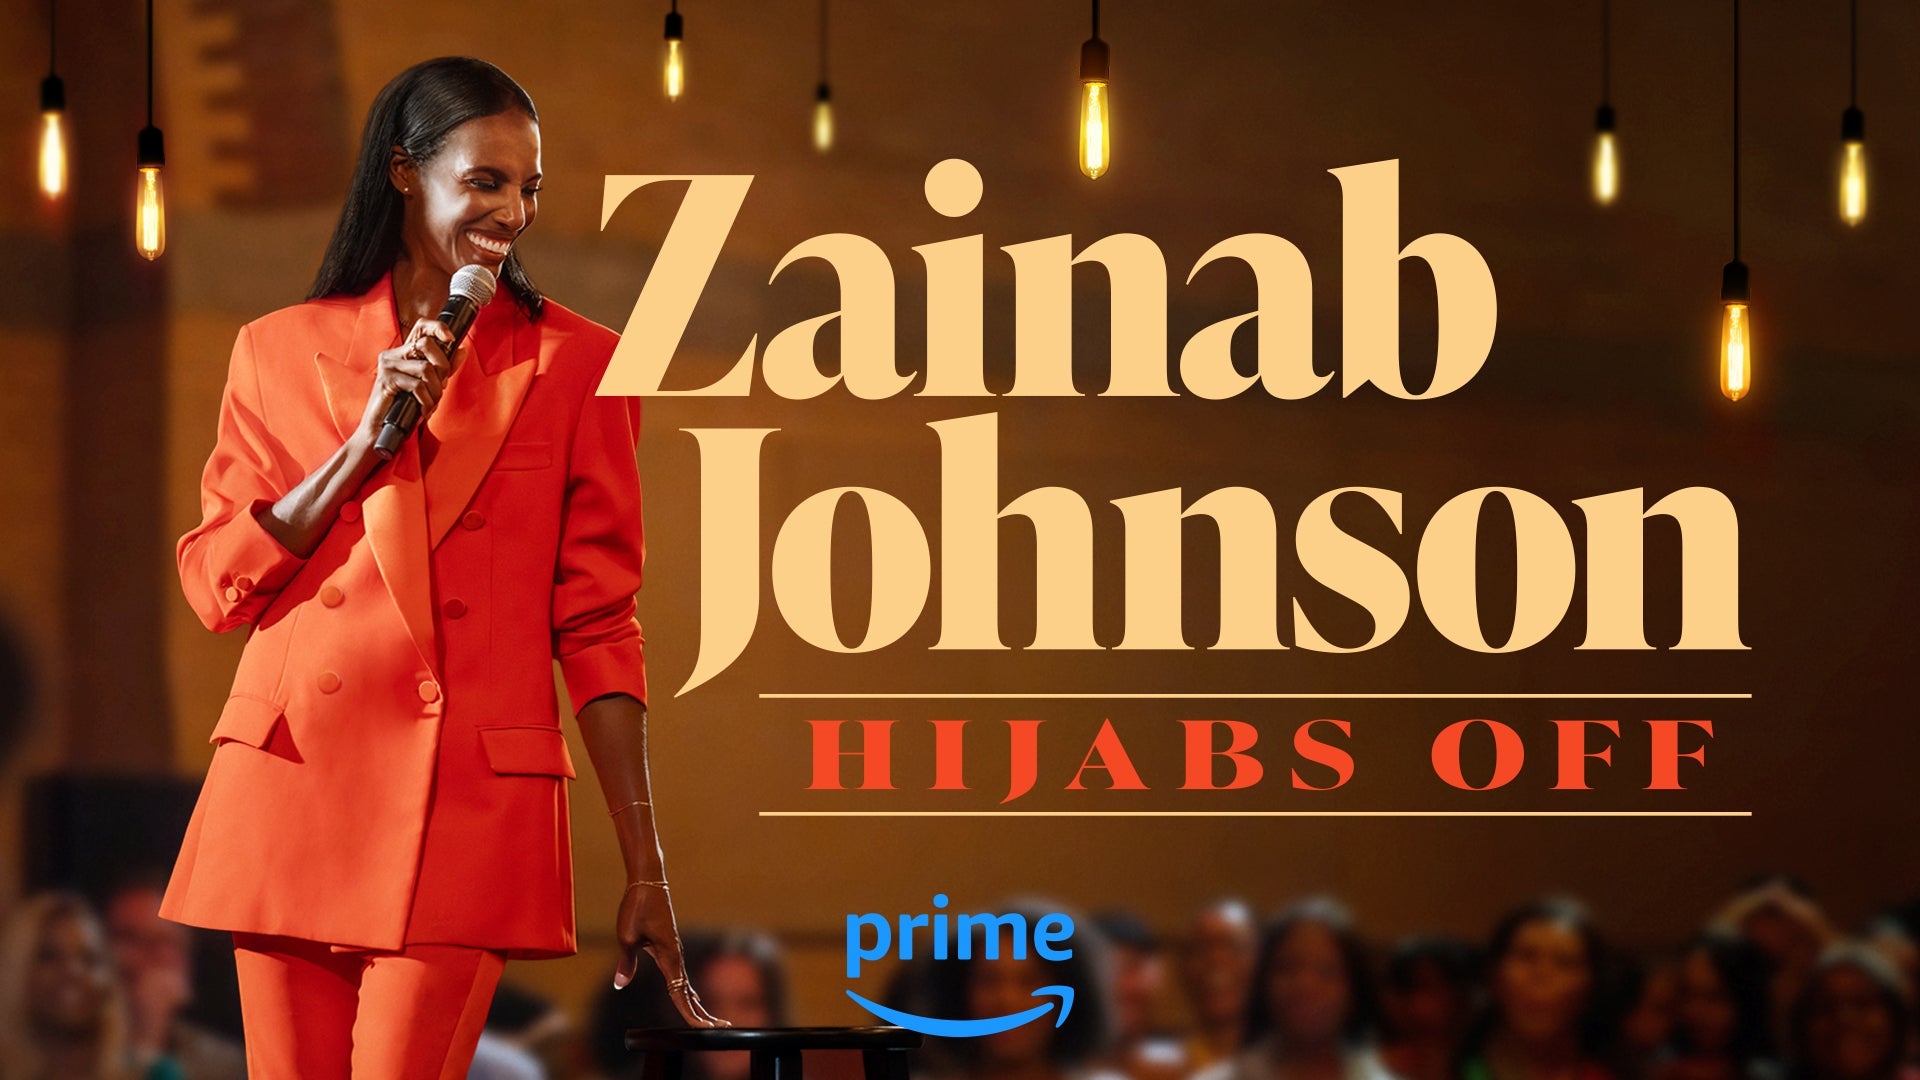 Zainab Johnson Brings Debut Special 'Hijabs Off' To Prime Video